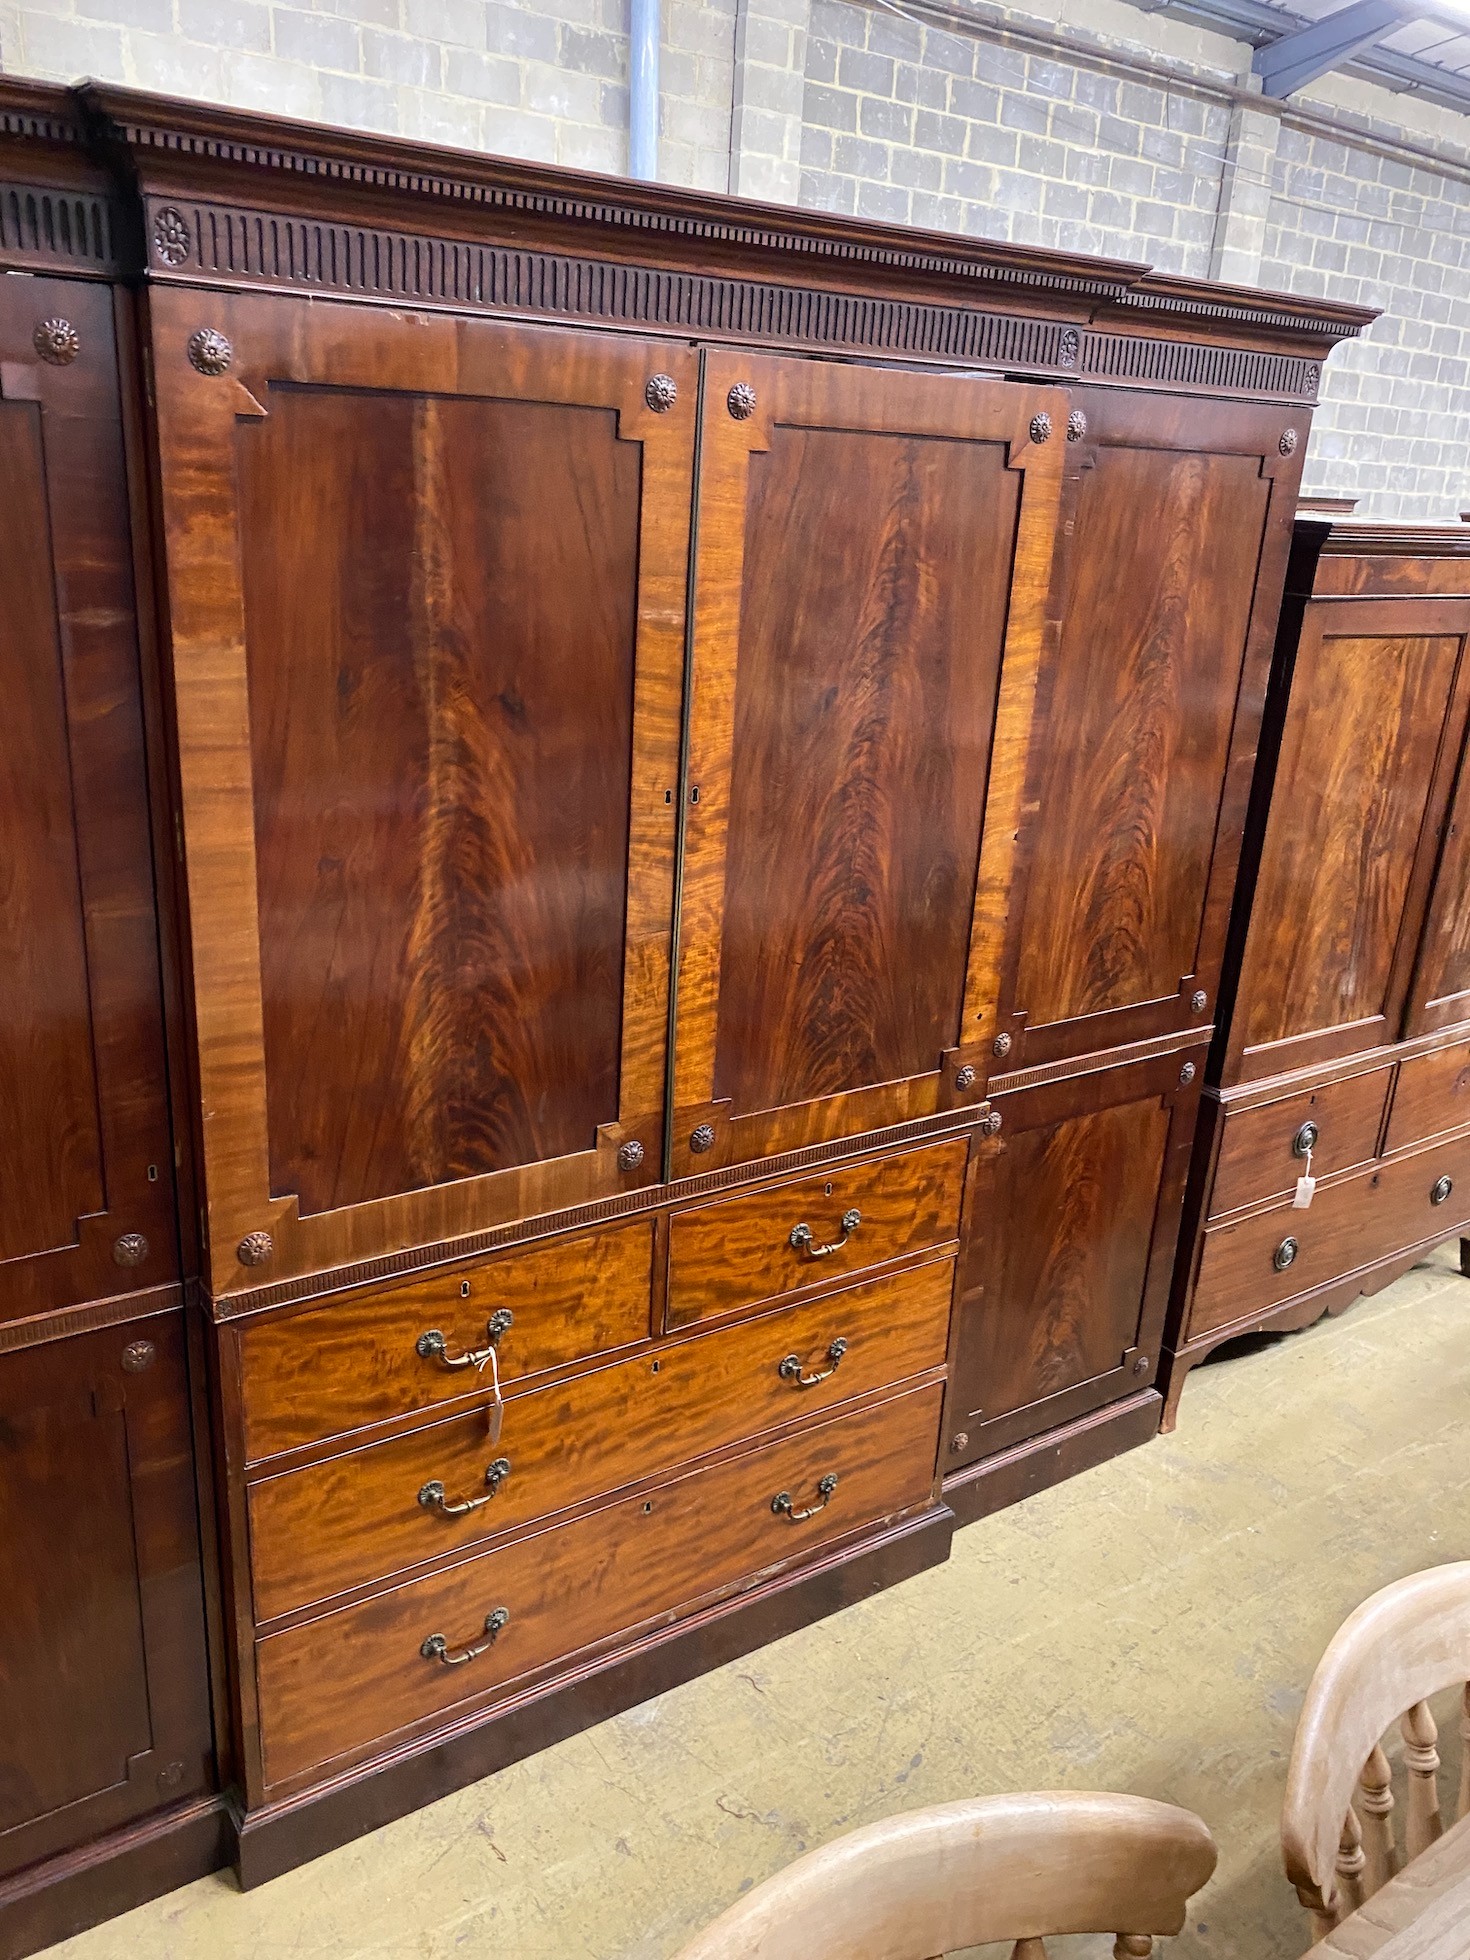 An Edwardian mahogany breakfront wardrobe, with two doors enclosing trays and four drawers flanked by hanging compartments, width 256cm, height 209cm